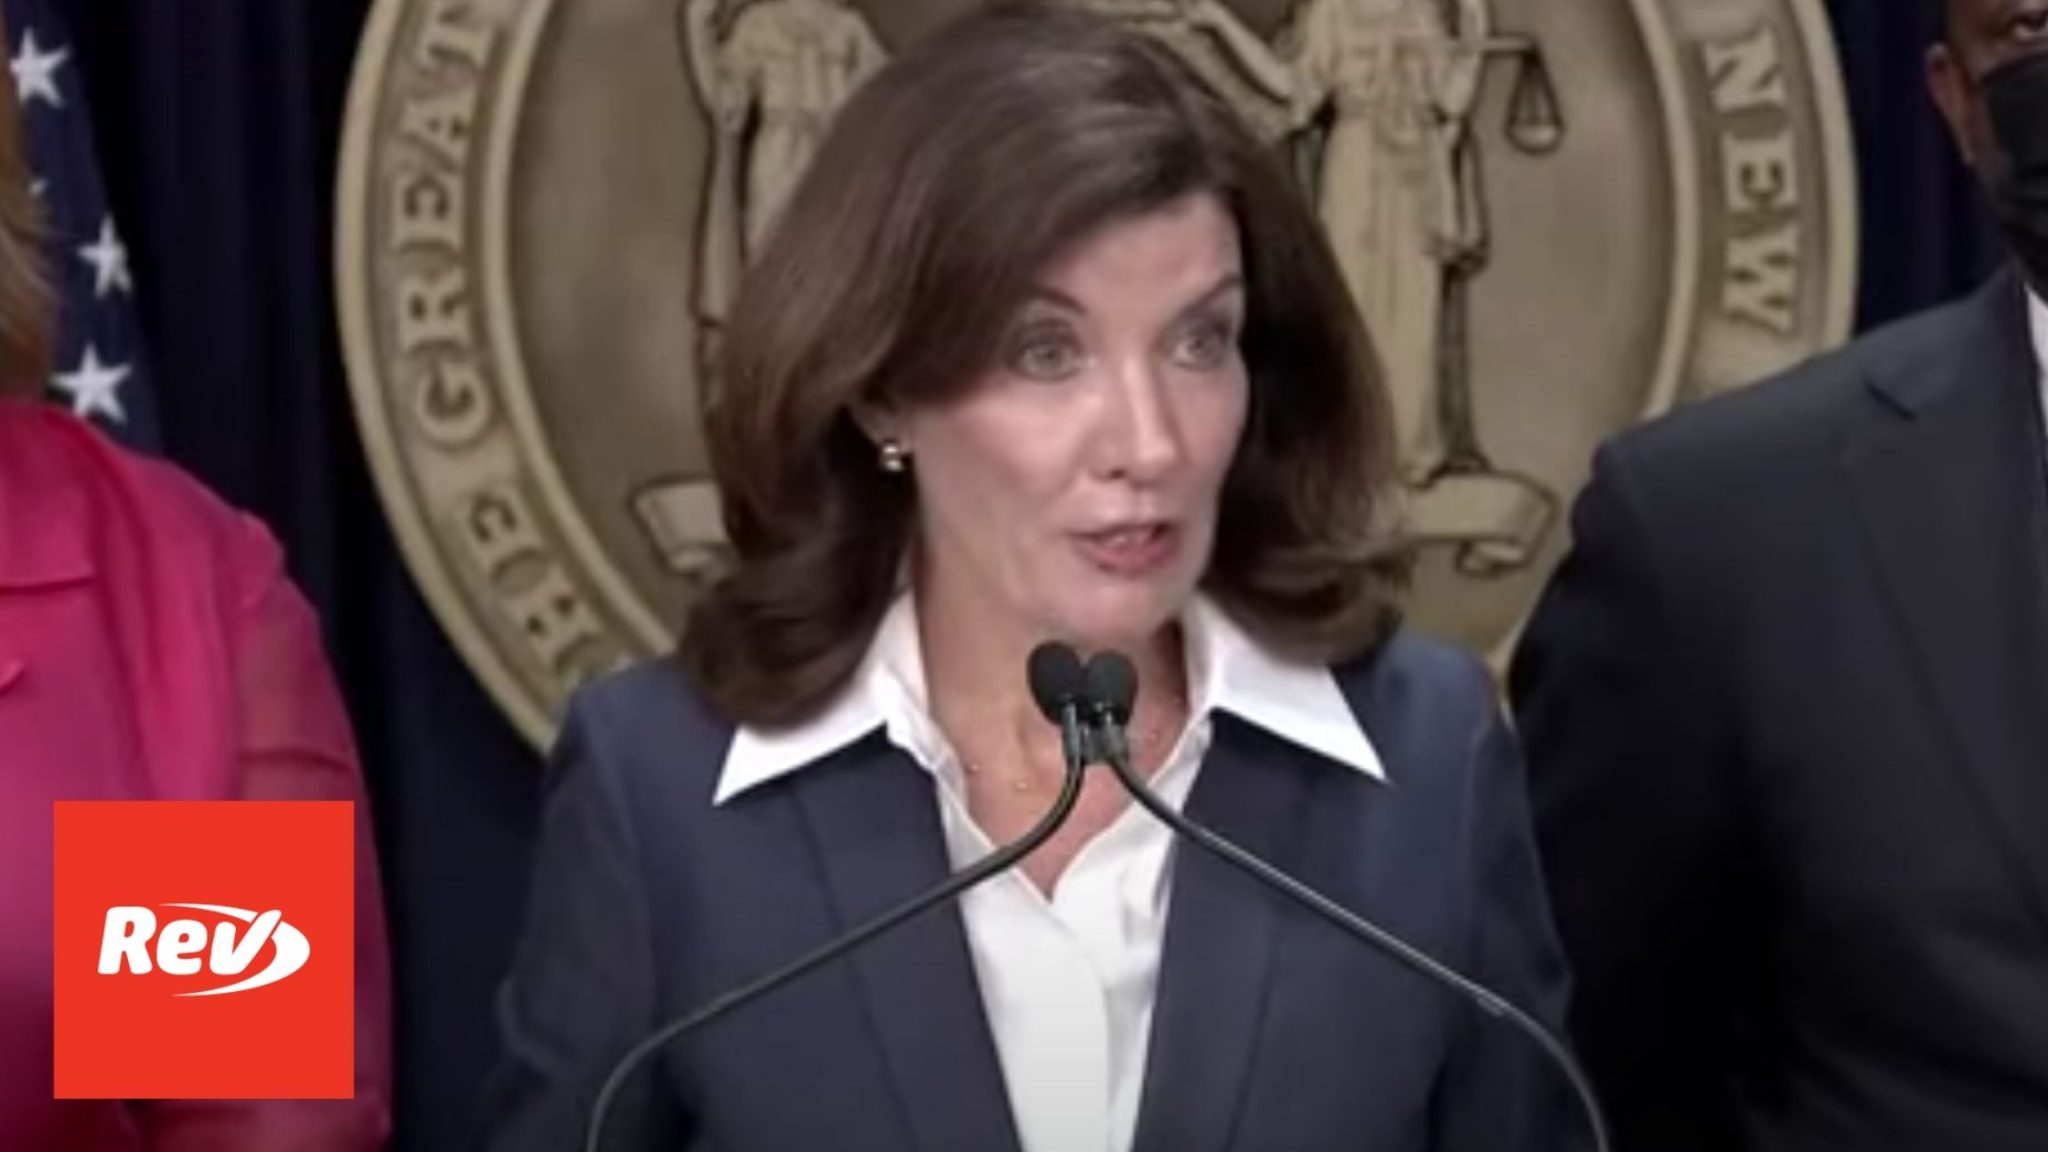 New York Kathy Hochul Signs "Less is More" Law, To Release 191 Prison Inmates Press Conference Transcript